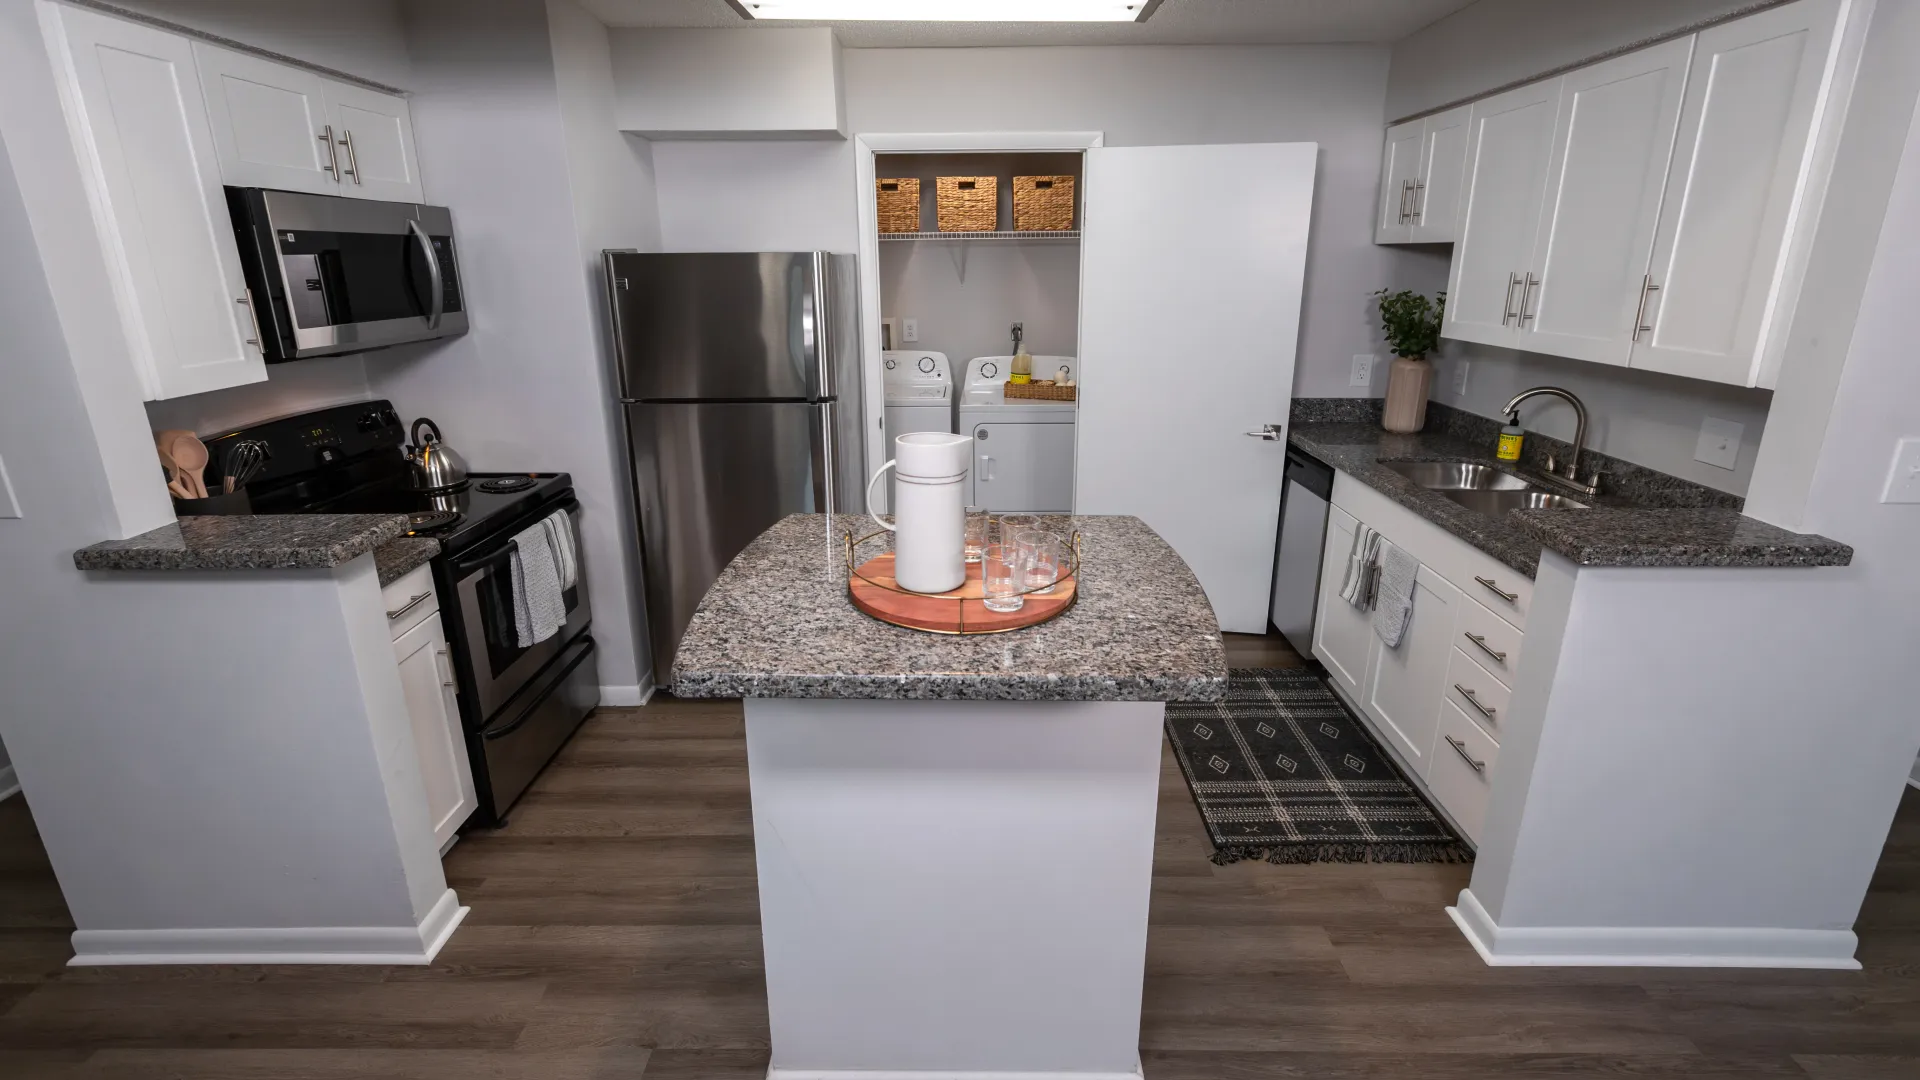 Modern kitchen with granite-style countertops, stainless steel appliances, white cabinetry, an island, and a built-in pantry with wicker baskets.